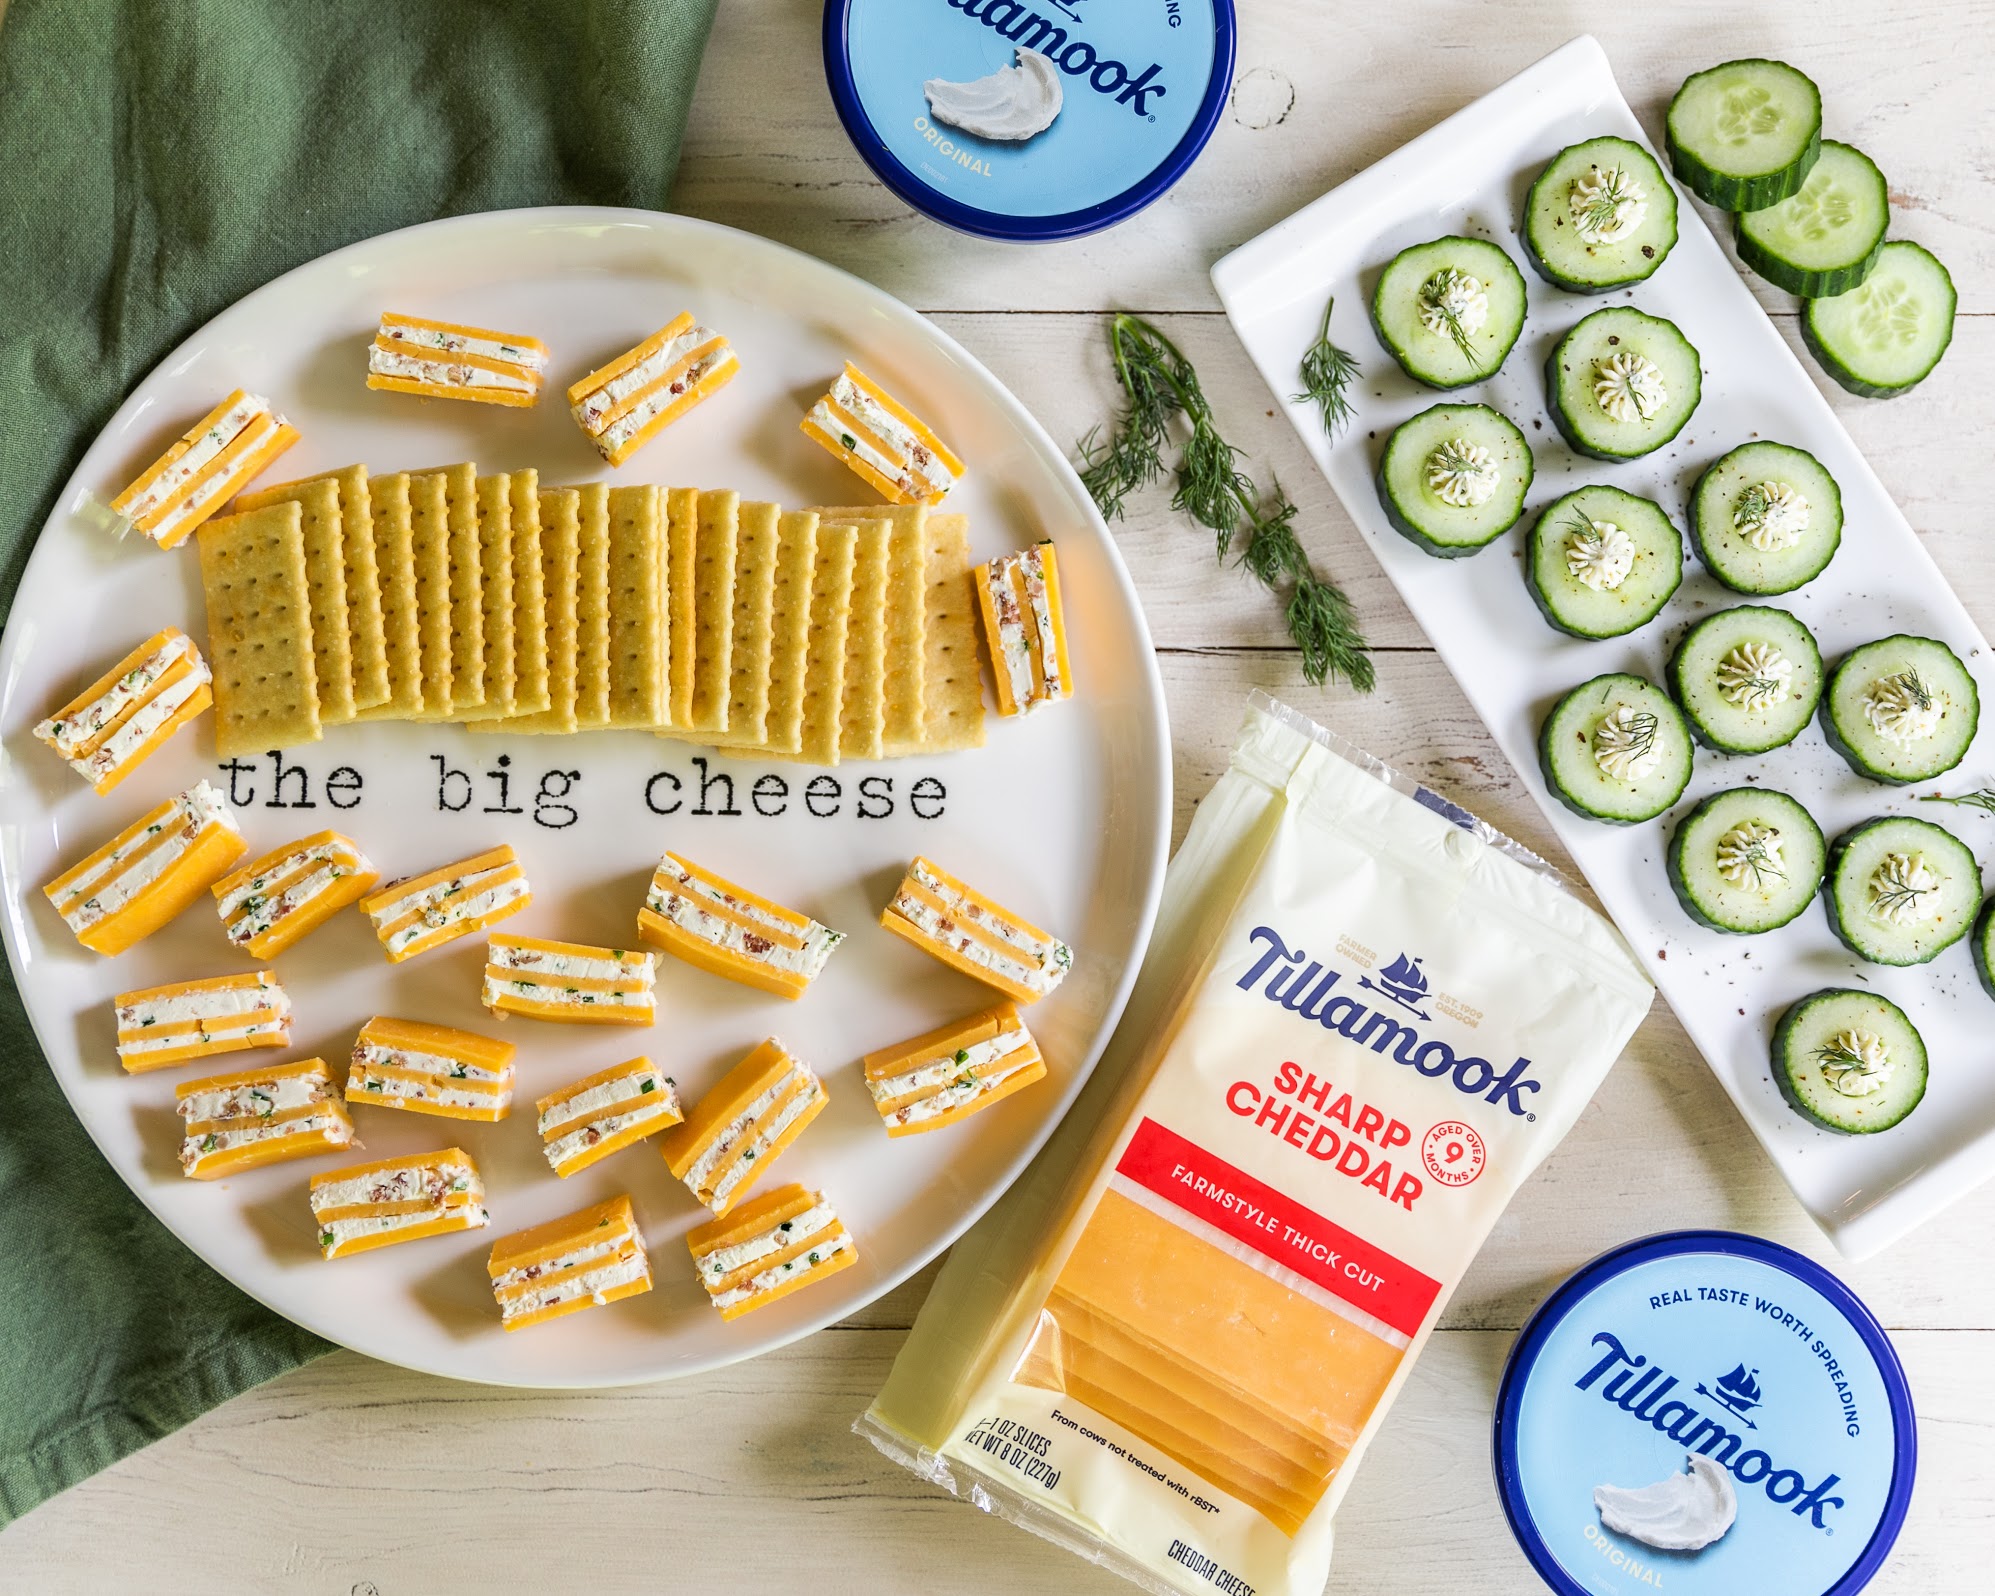 Summer Entertaining Made Easy With Tillamook - Save Now At Publix on I Heart Publix